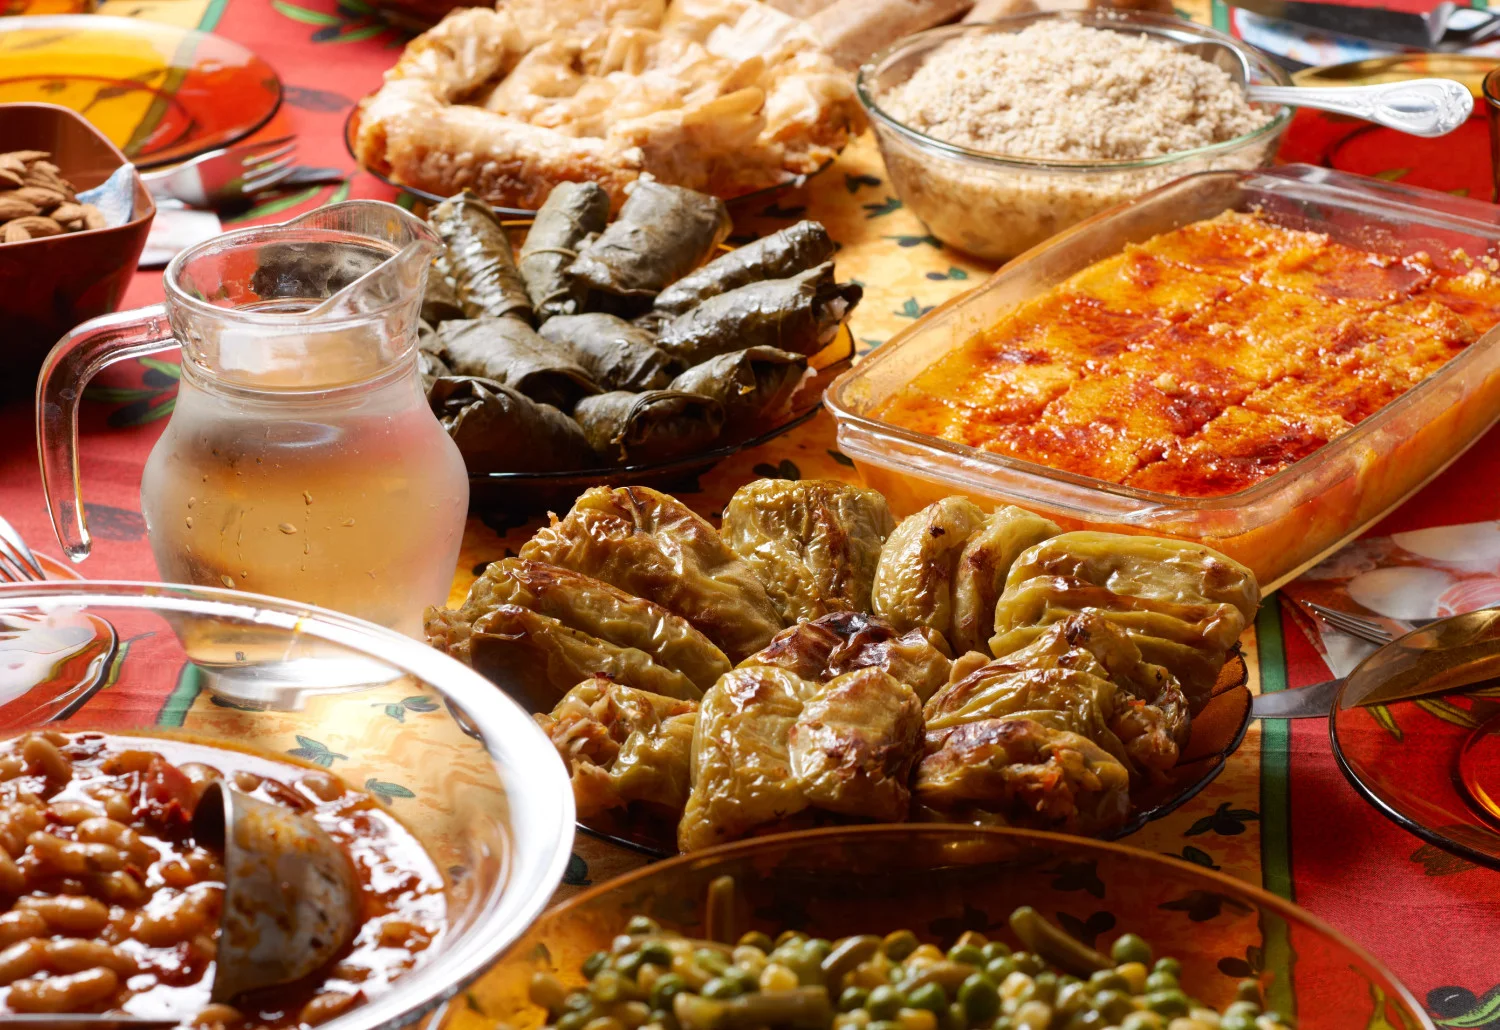 Hearty traditional dishes and savoury treats make up the menu. Bulgarian cuisine can be enjoyed in a rustic atmosphere.